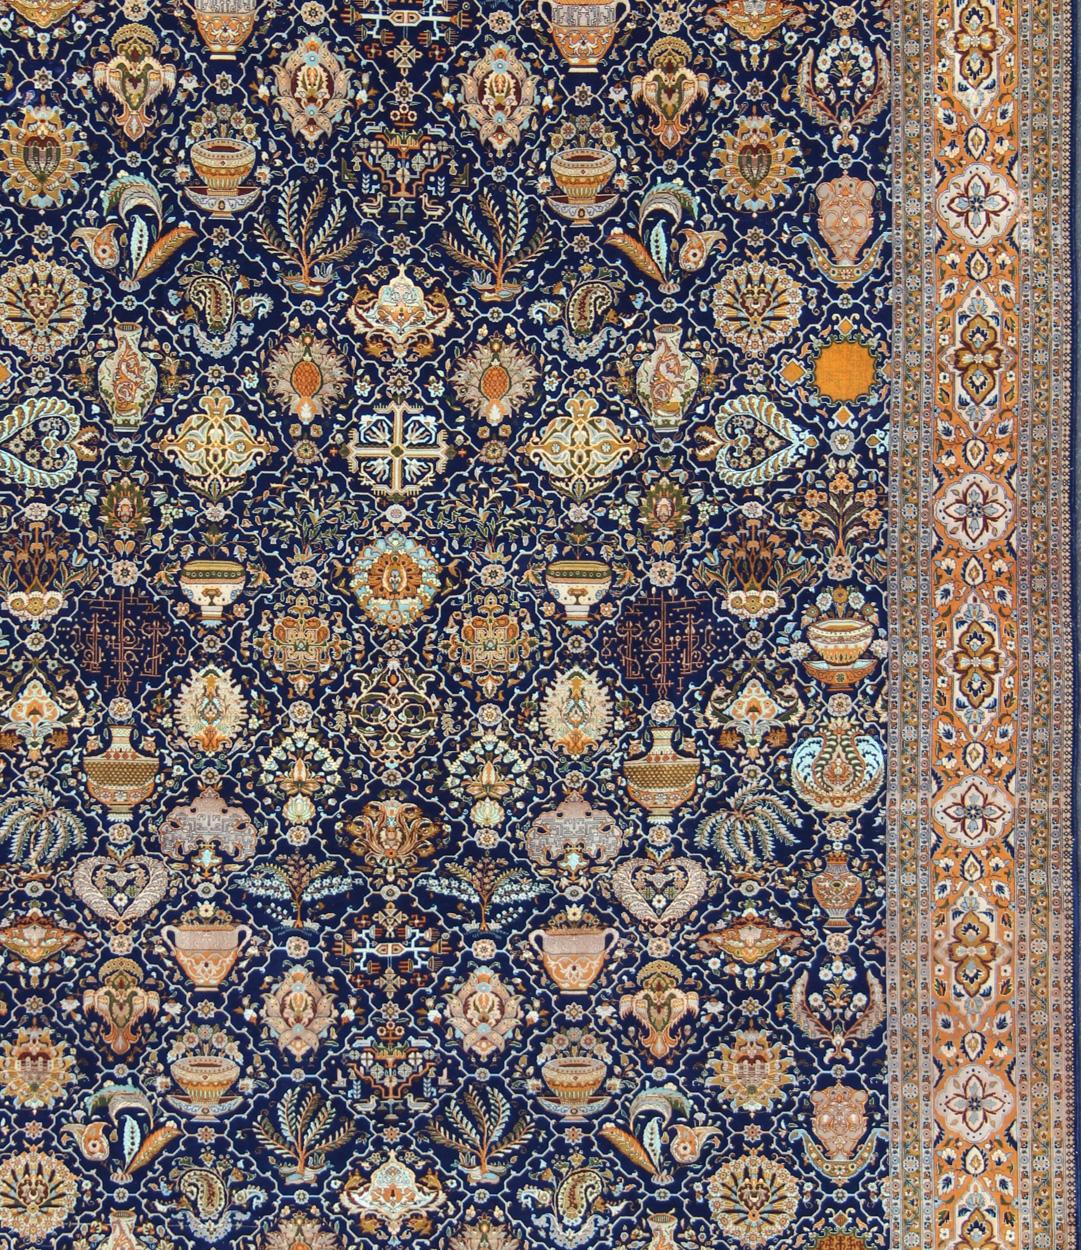 Blue background Persian Tabriz carpet with intricate floral elements, rug BC-200599, country of origin / type: Iran / Tabriz, circa 1900

This outstanding antique Persian Tabriz carpet is primarily characterized by its classical composition. This